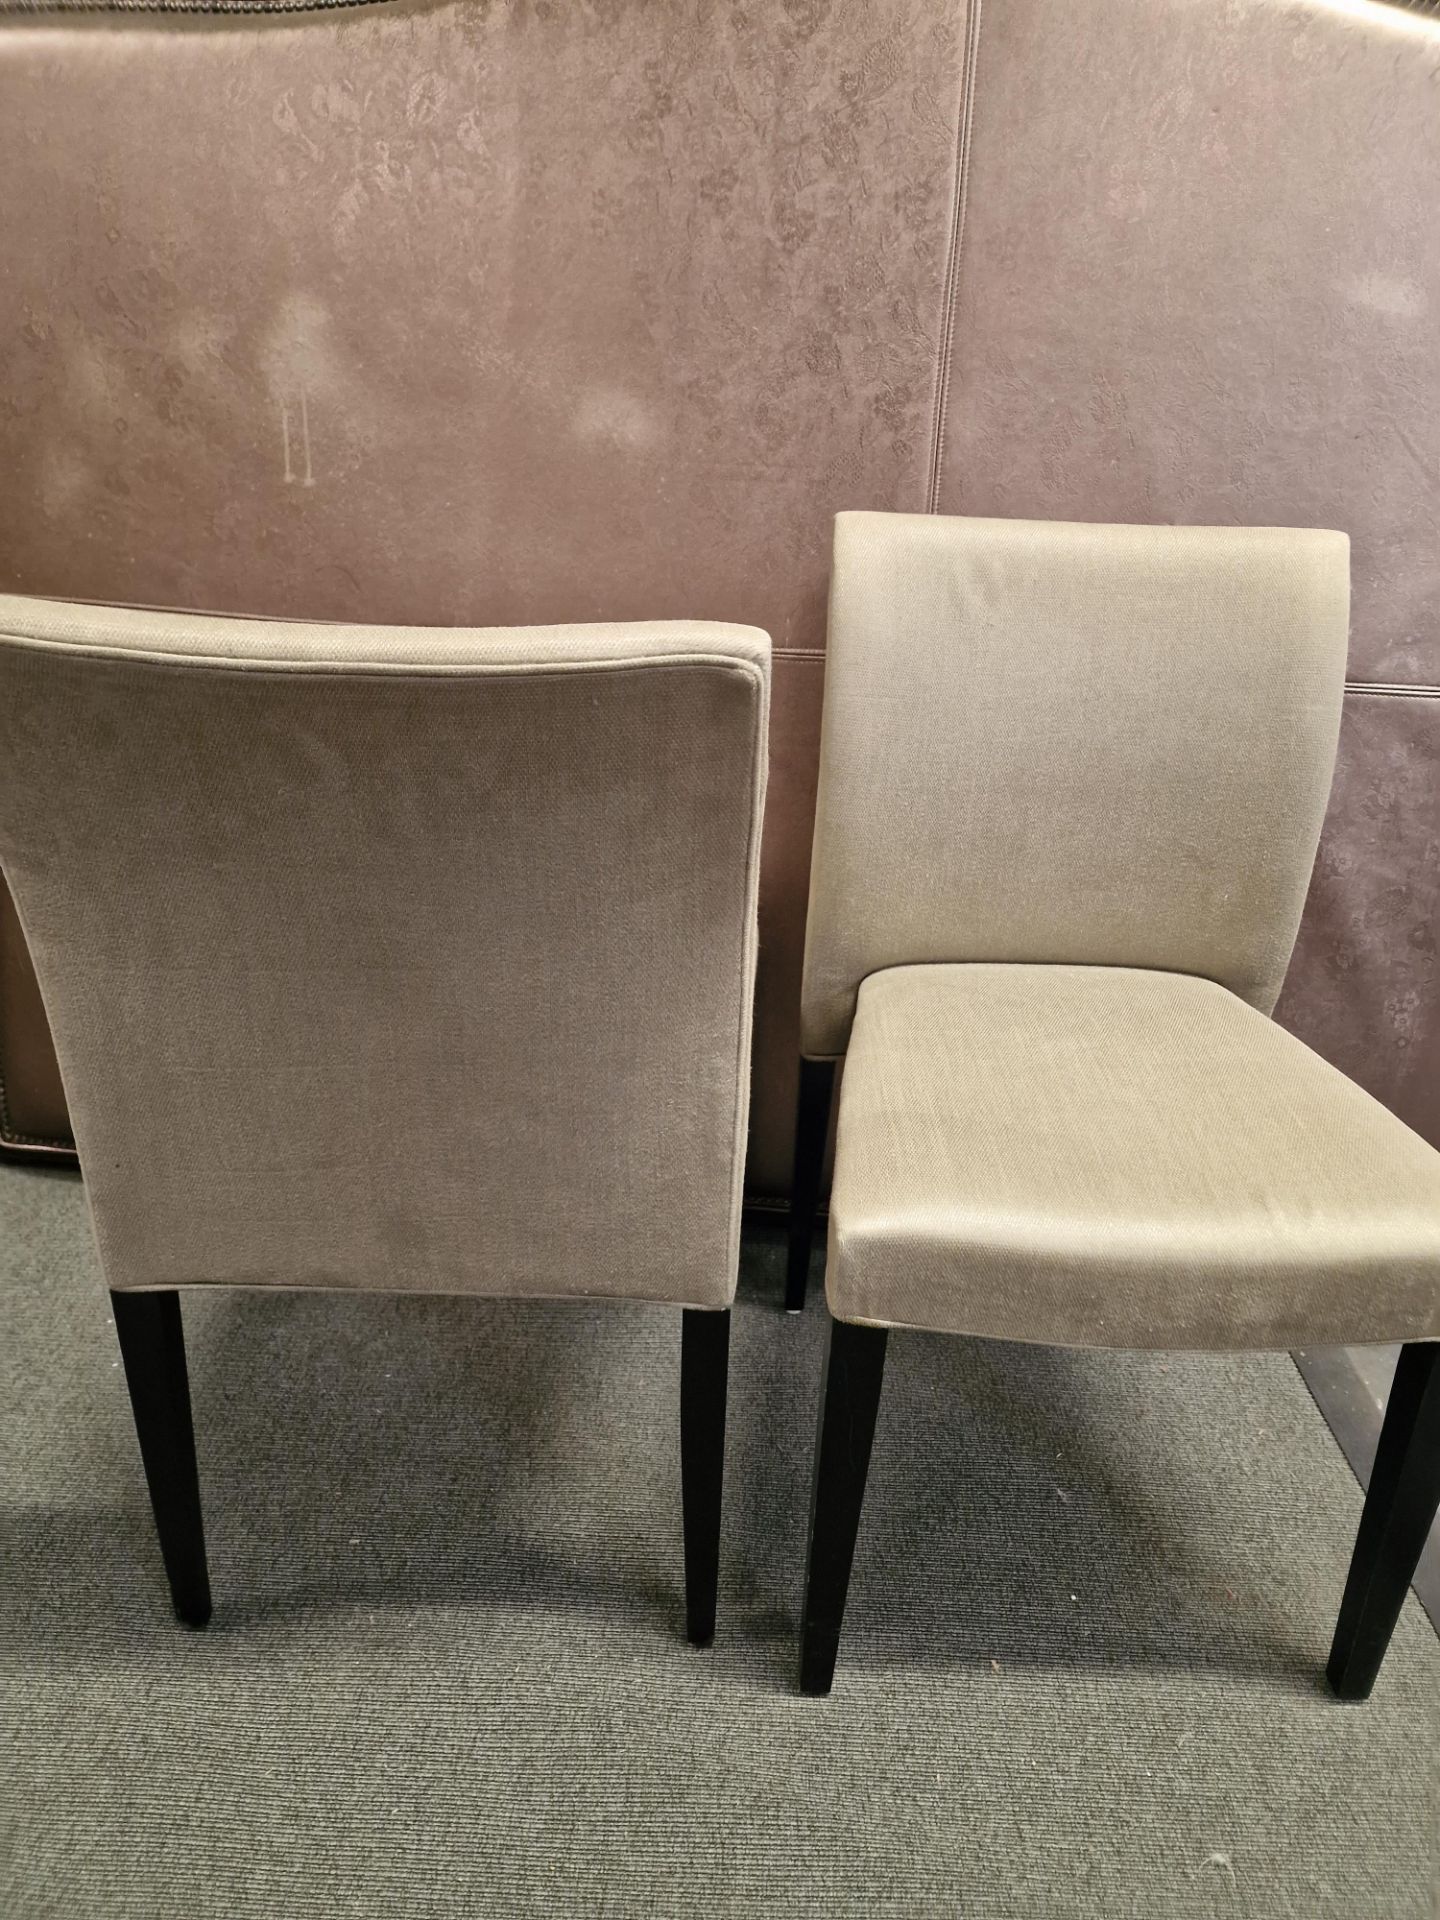 4 x Dining Chairs The linen fabric dining chairs are slightly reclined and have padded backs on - Image 2 of 2